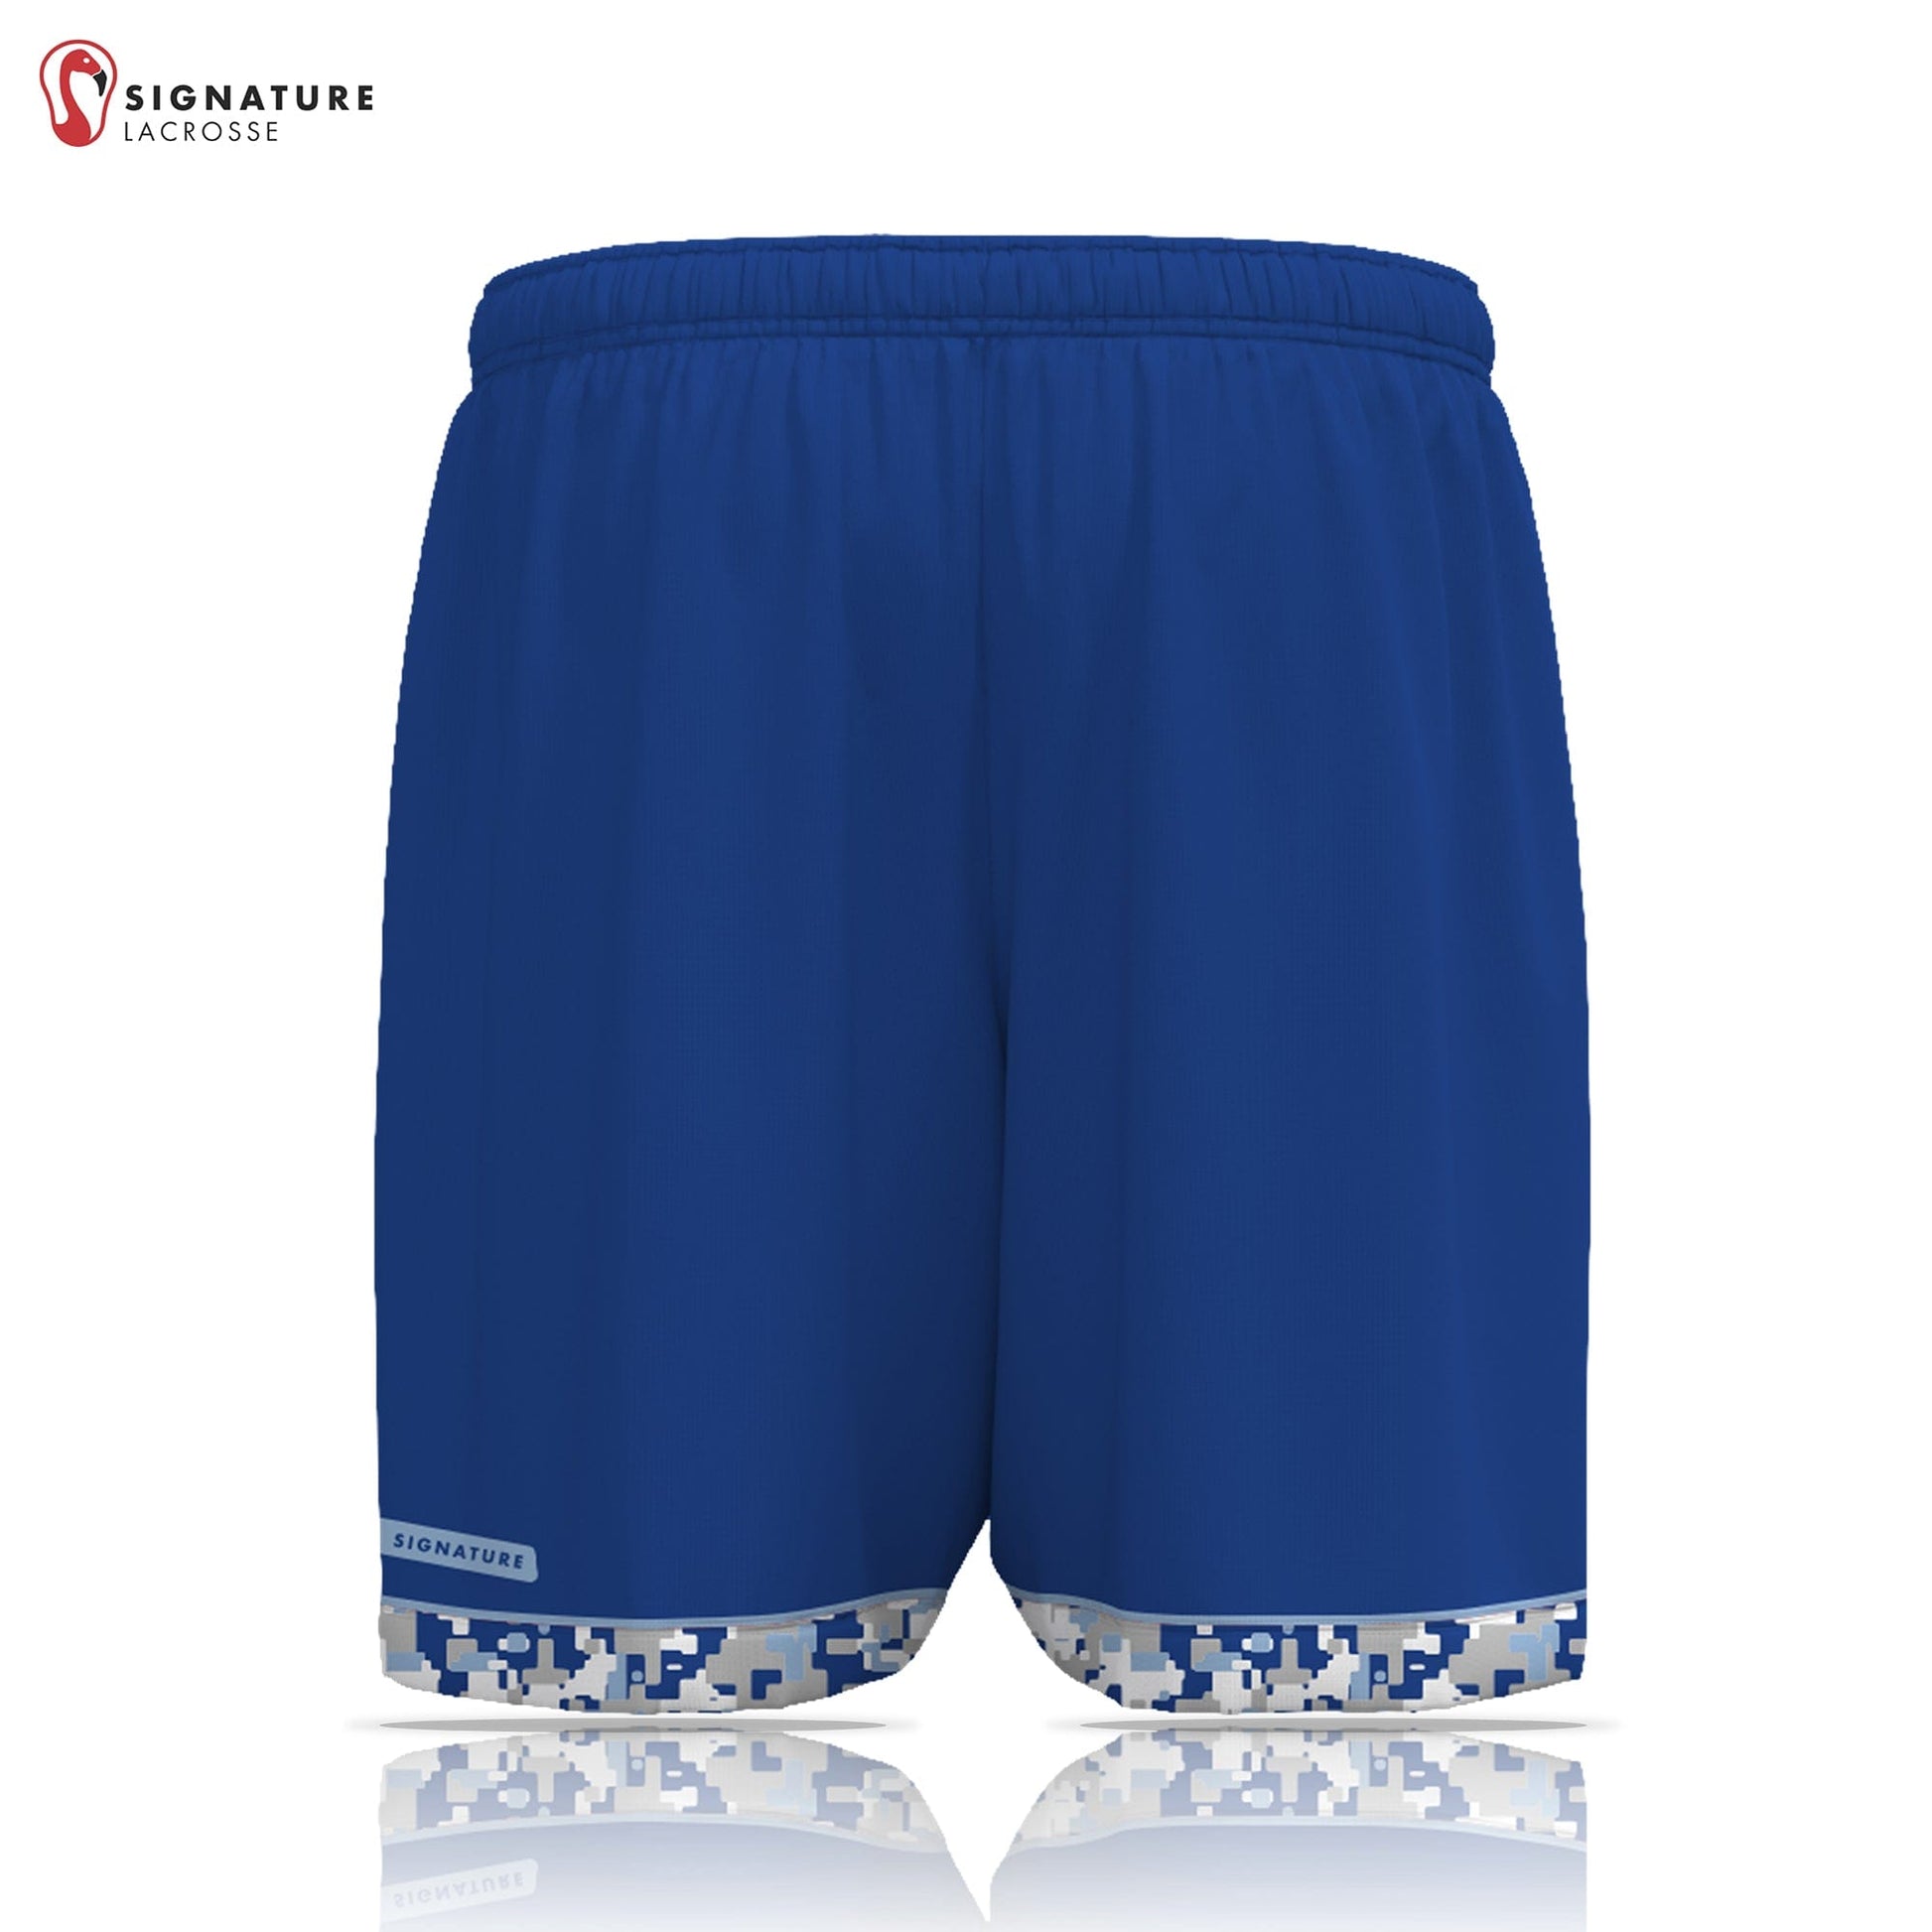 Georgetown-Triton Youth Lacrosse Men's Player Game Shorts Signature Lacrosse